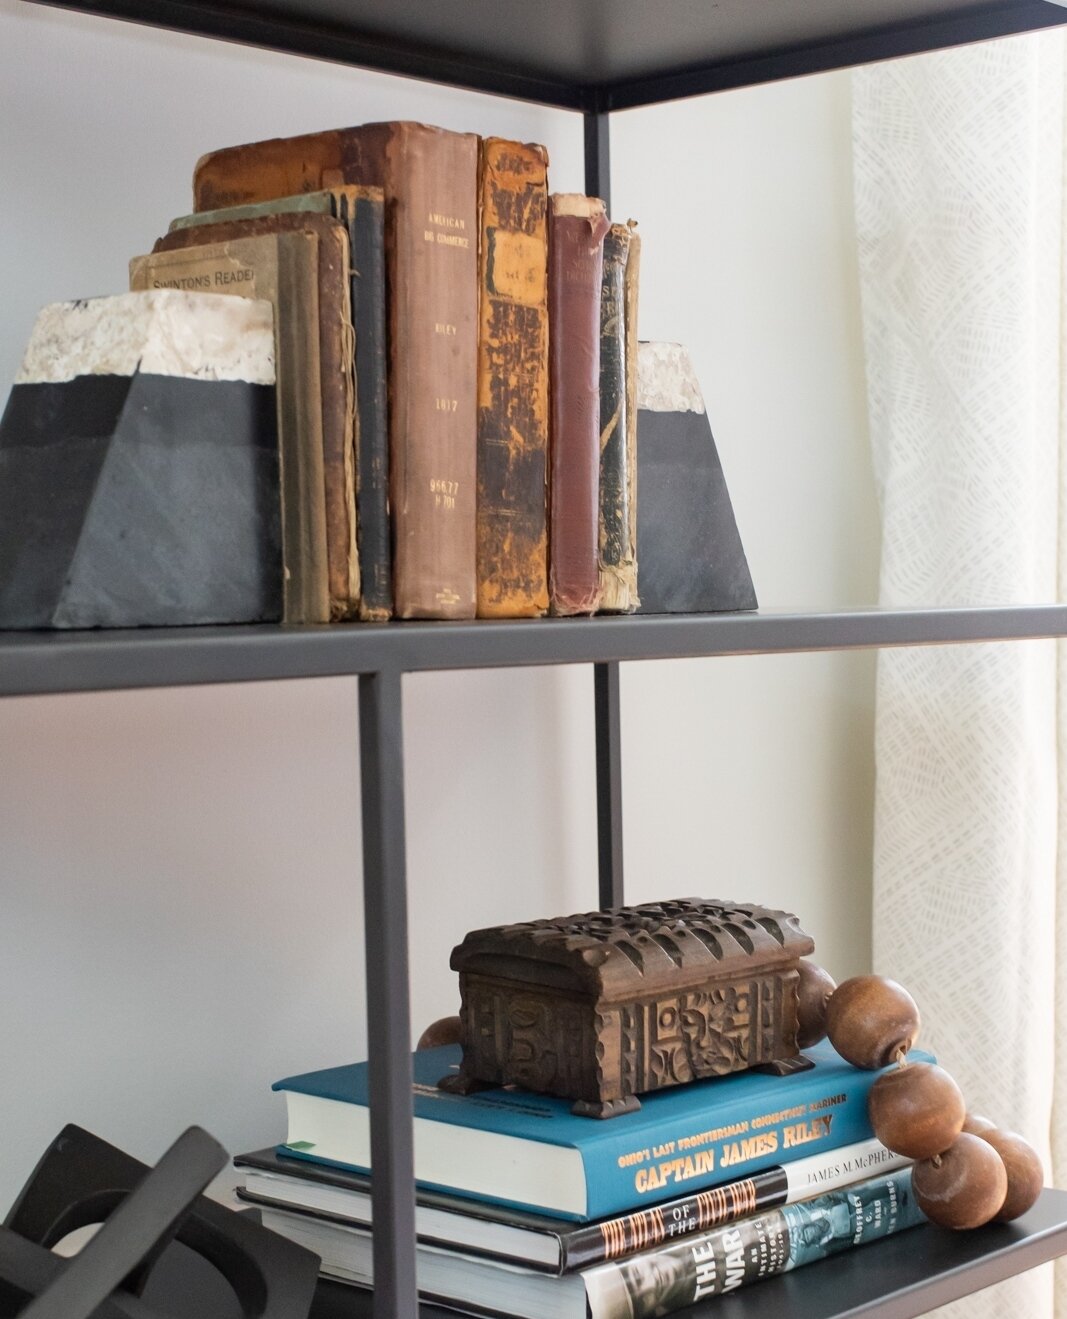 Digging through client keepsakes is one of many things we do to curate a home that is personable and comfortable. This client's grandfather has a rich history in being a Captain and protecting our country. We paired already owned books with updated a